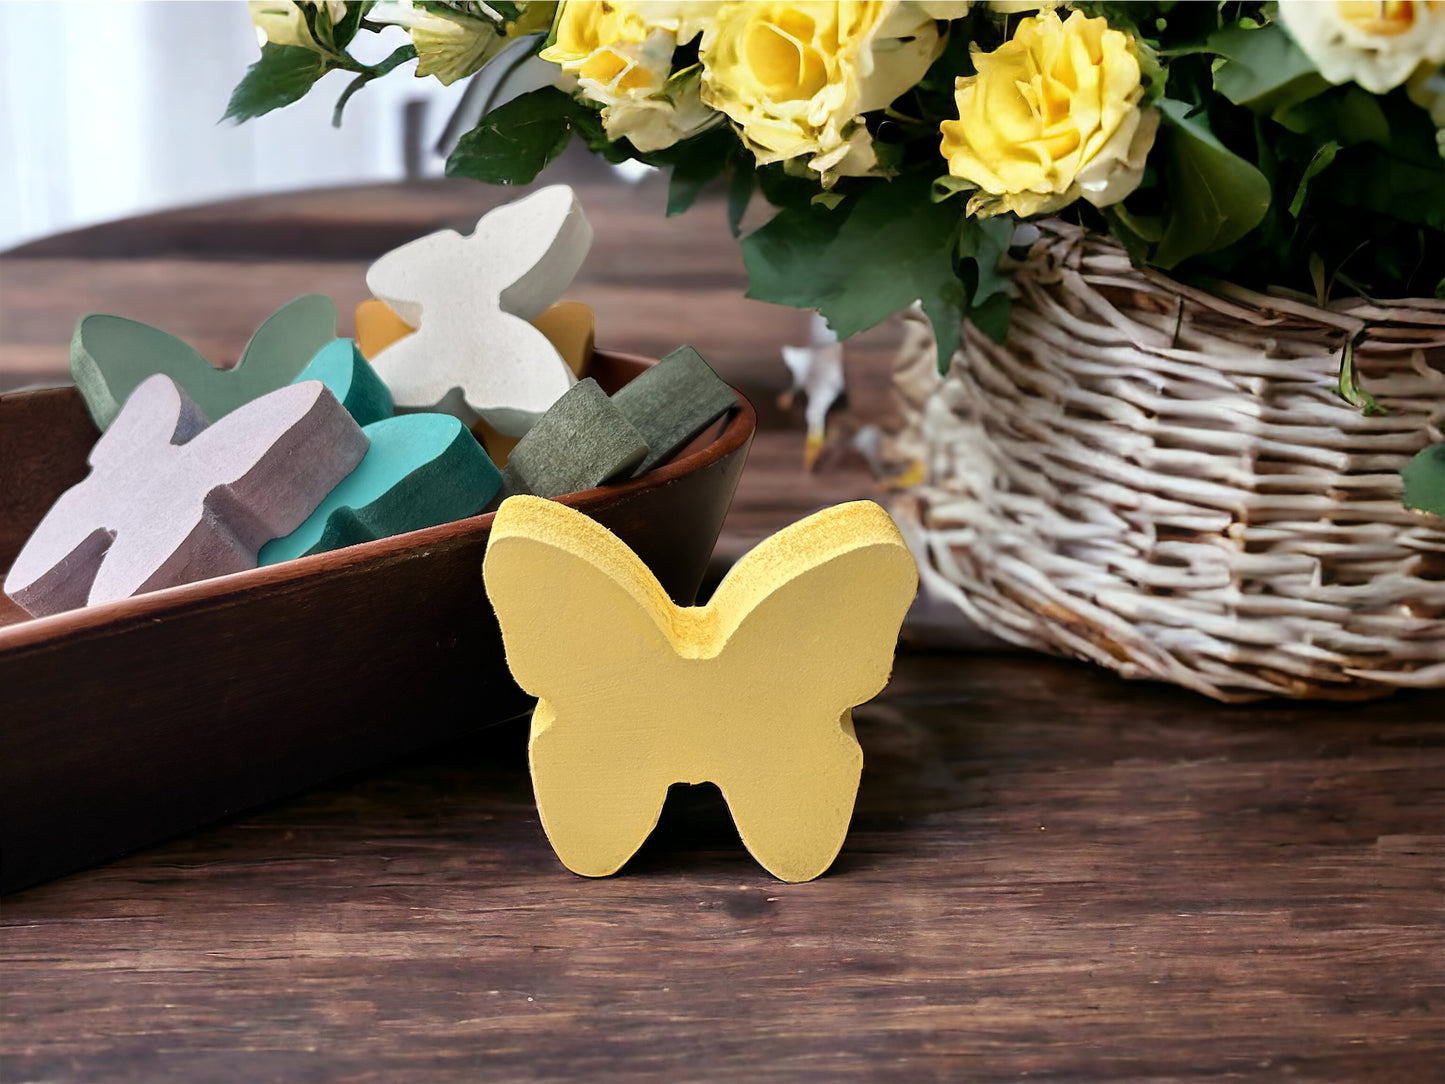 Primitive/Rustic MINI Wood Butterfly Bowl Fillers - set of 3